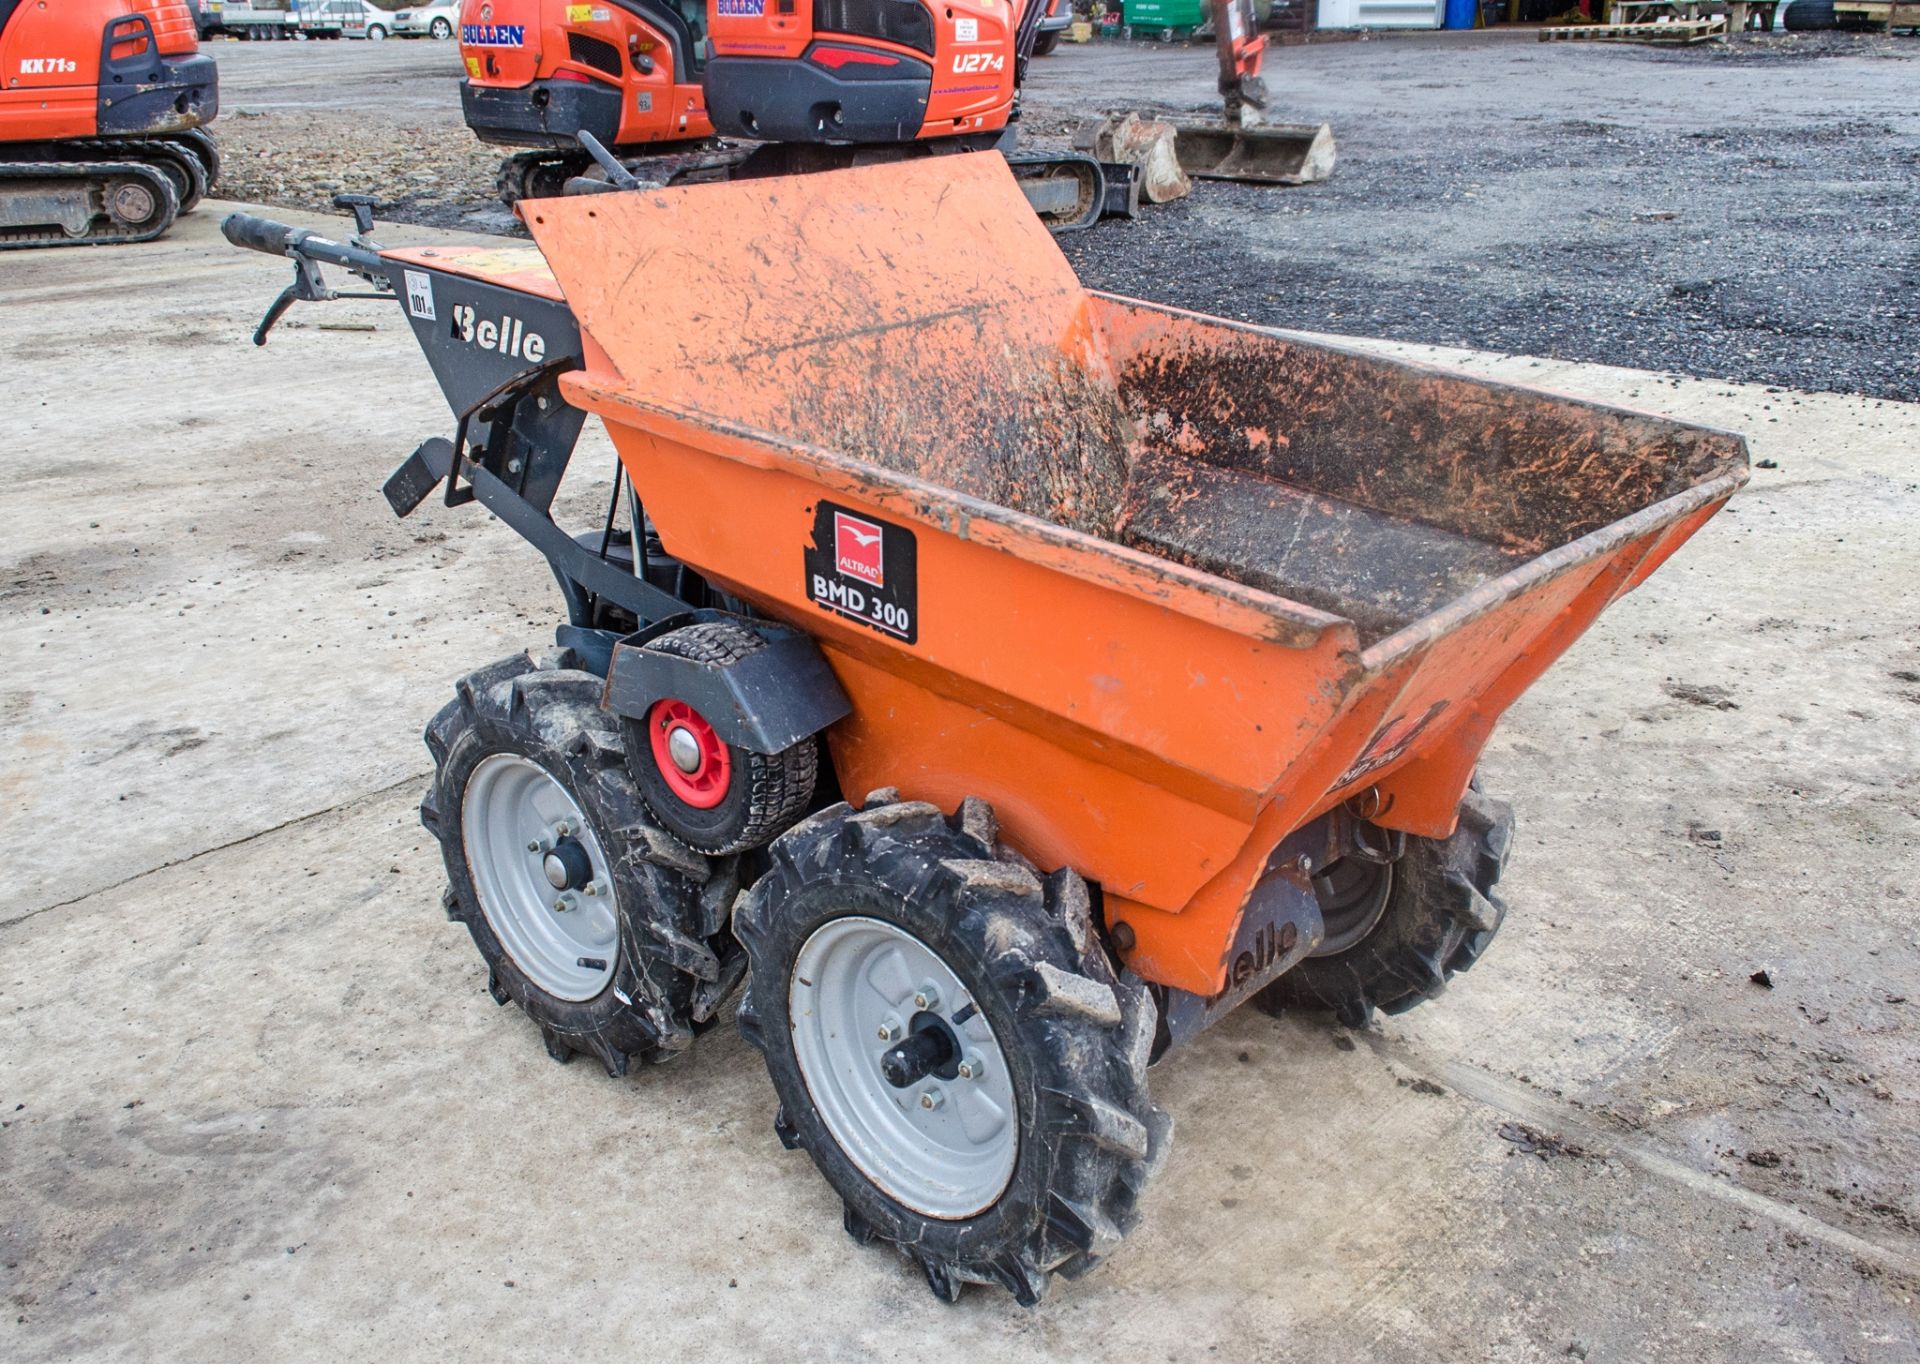 Belle BMD300 petrol driven power barrow Year: 2018 S/N: 148128 - Image 2 of 10